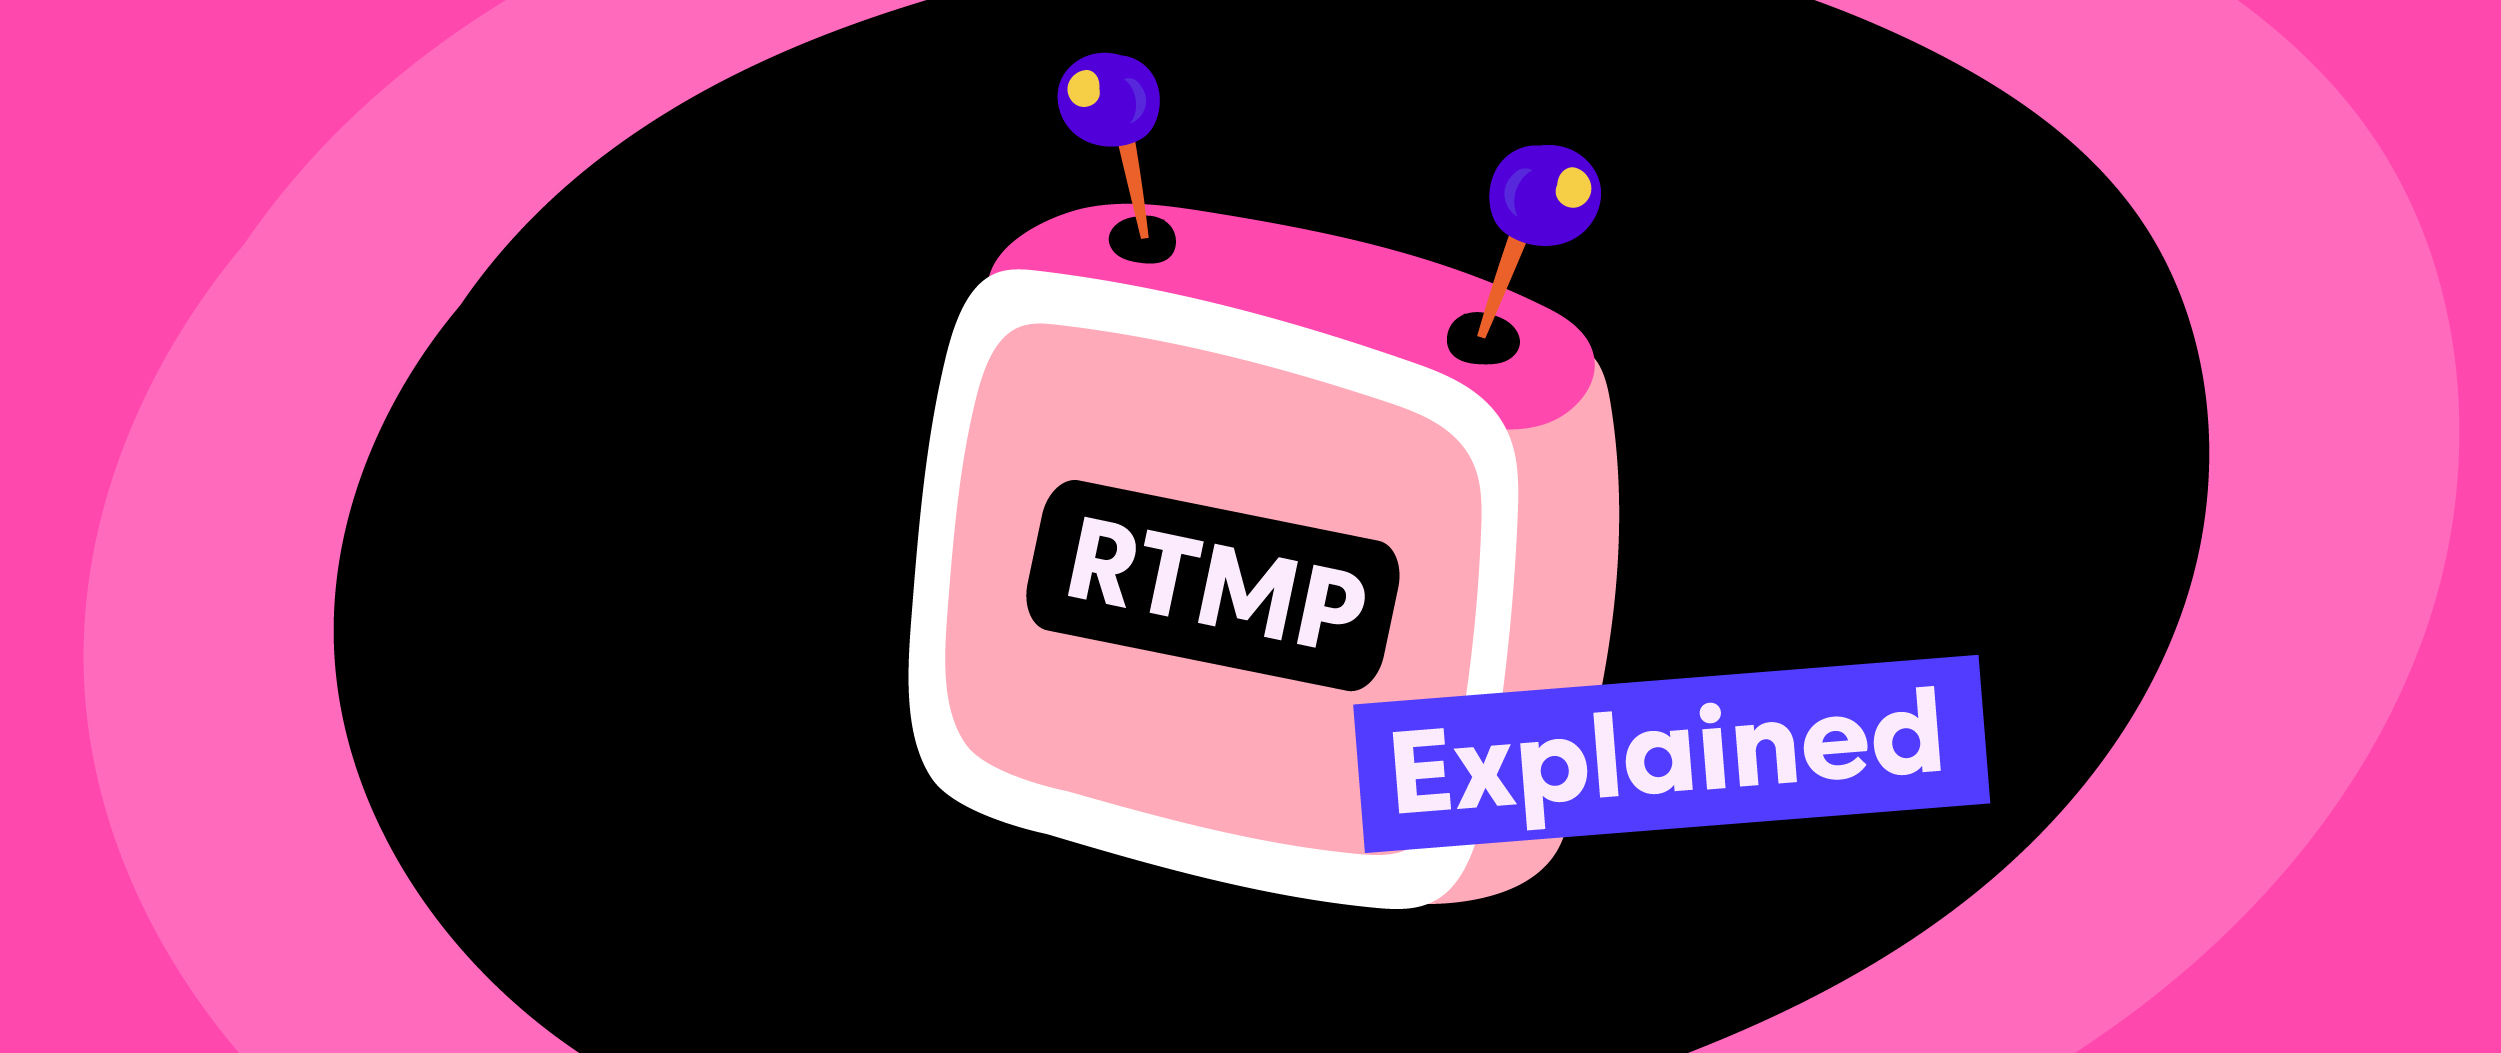 Real-time Messaging Protocol (RTMP) Explained